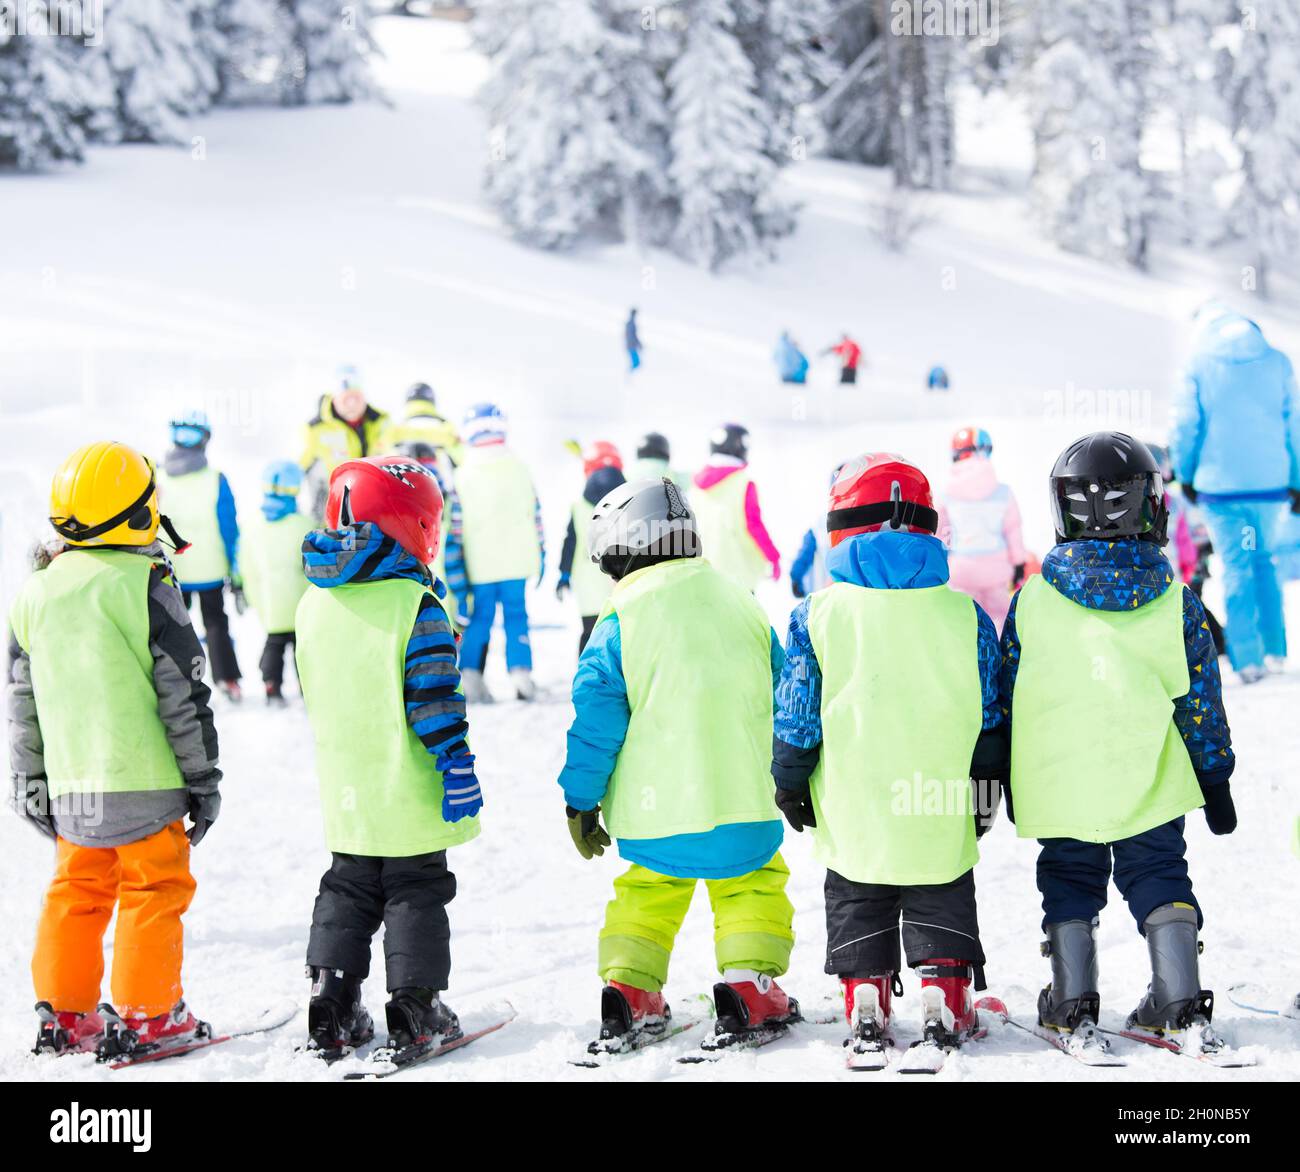 Group of small kids with helmets and vests standing on skis and learning basic skills for skiing at polygon Stock Photo